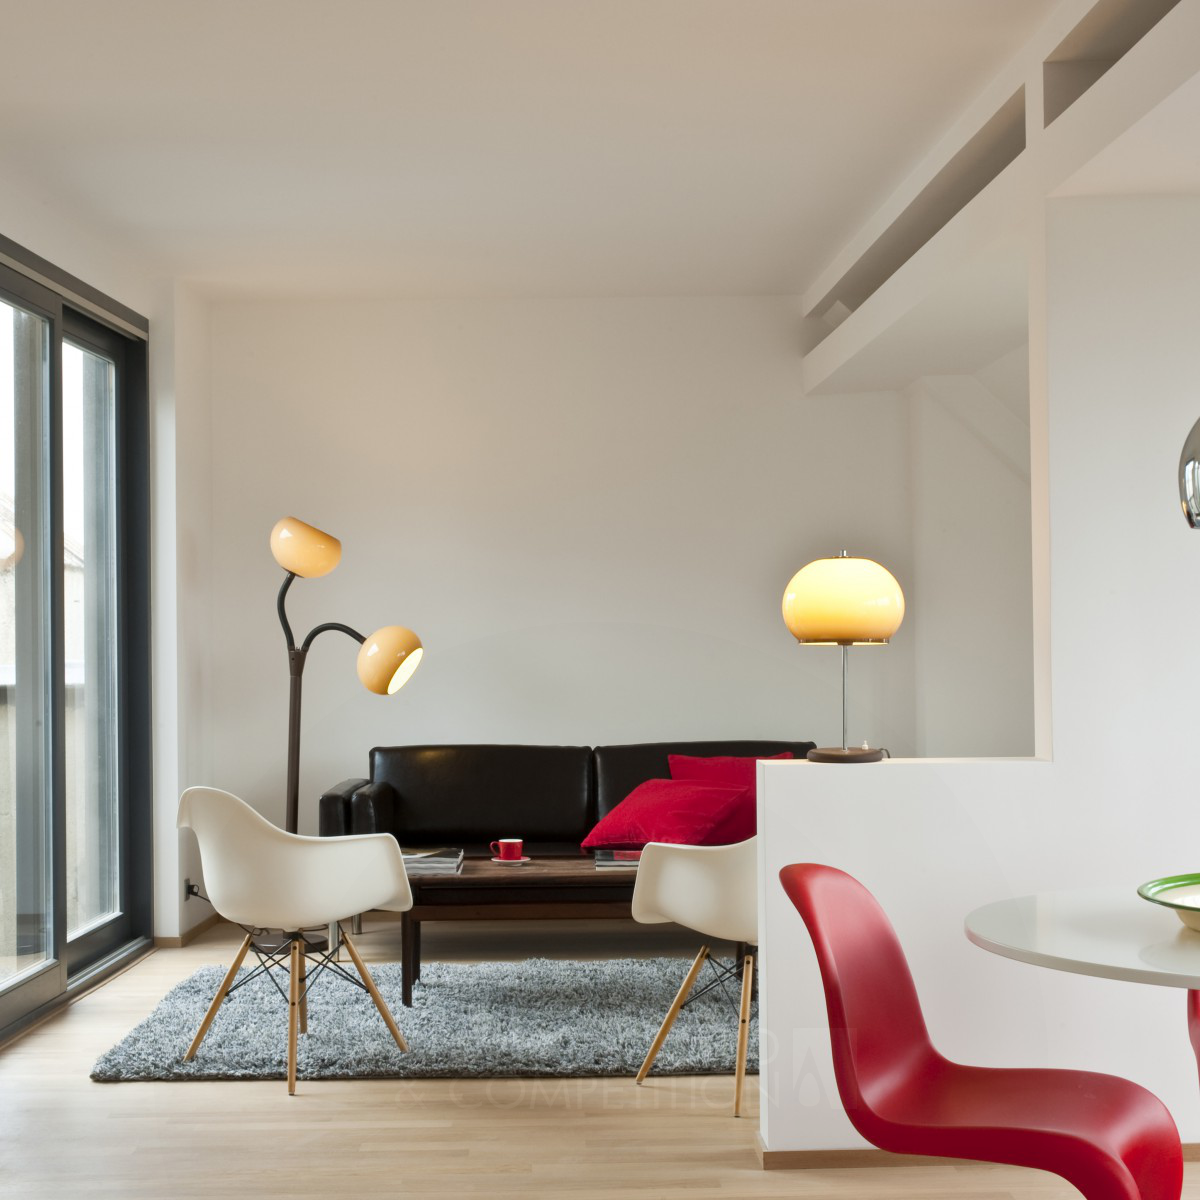 Aparthotel Housestories Apart hotel/furnished apartments  by Isabel Verstraete